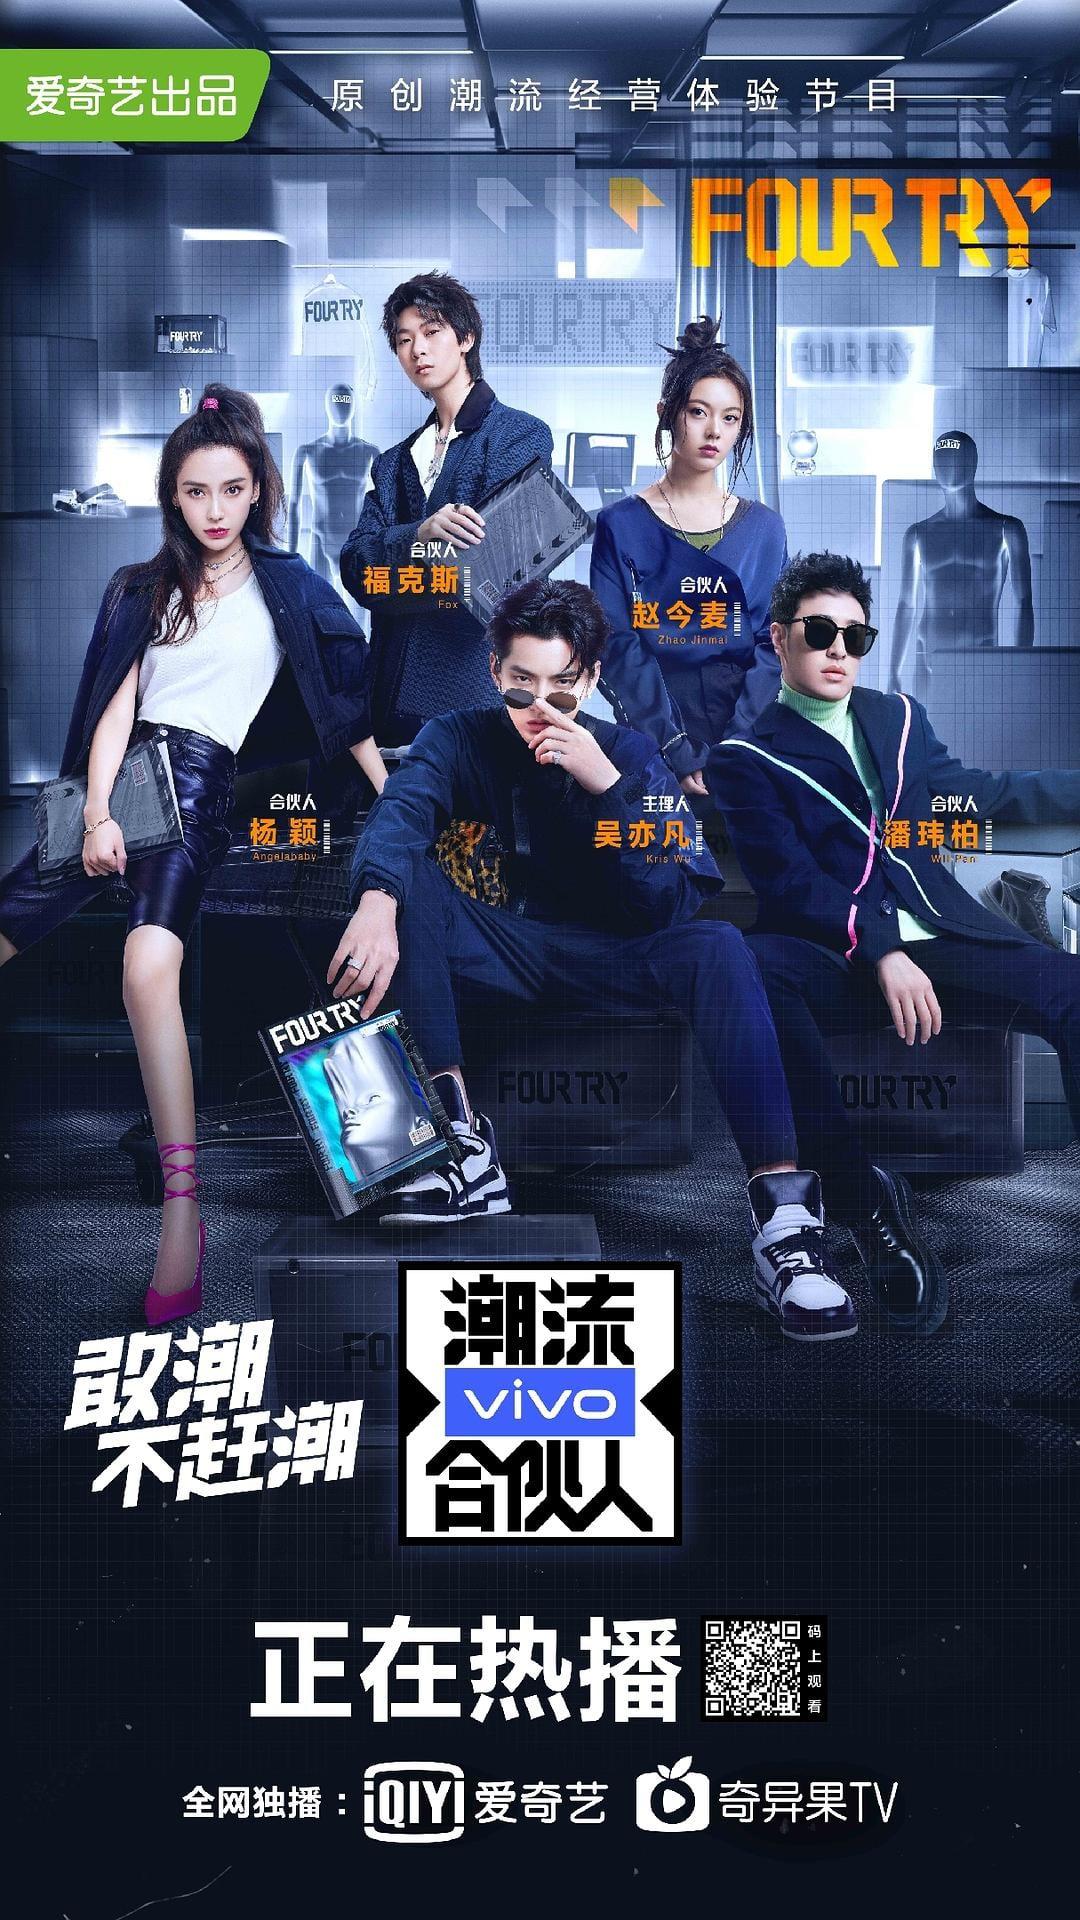 TV ratings for Four Try(潮流合伙人) in Ireland. iqiyi TV series